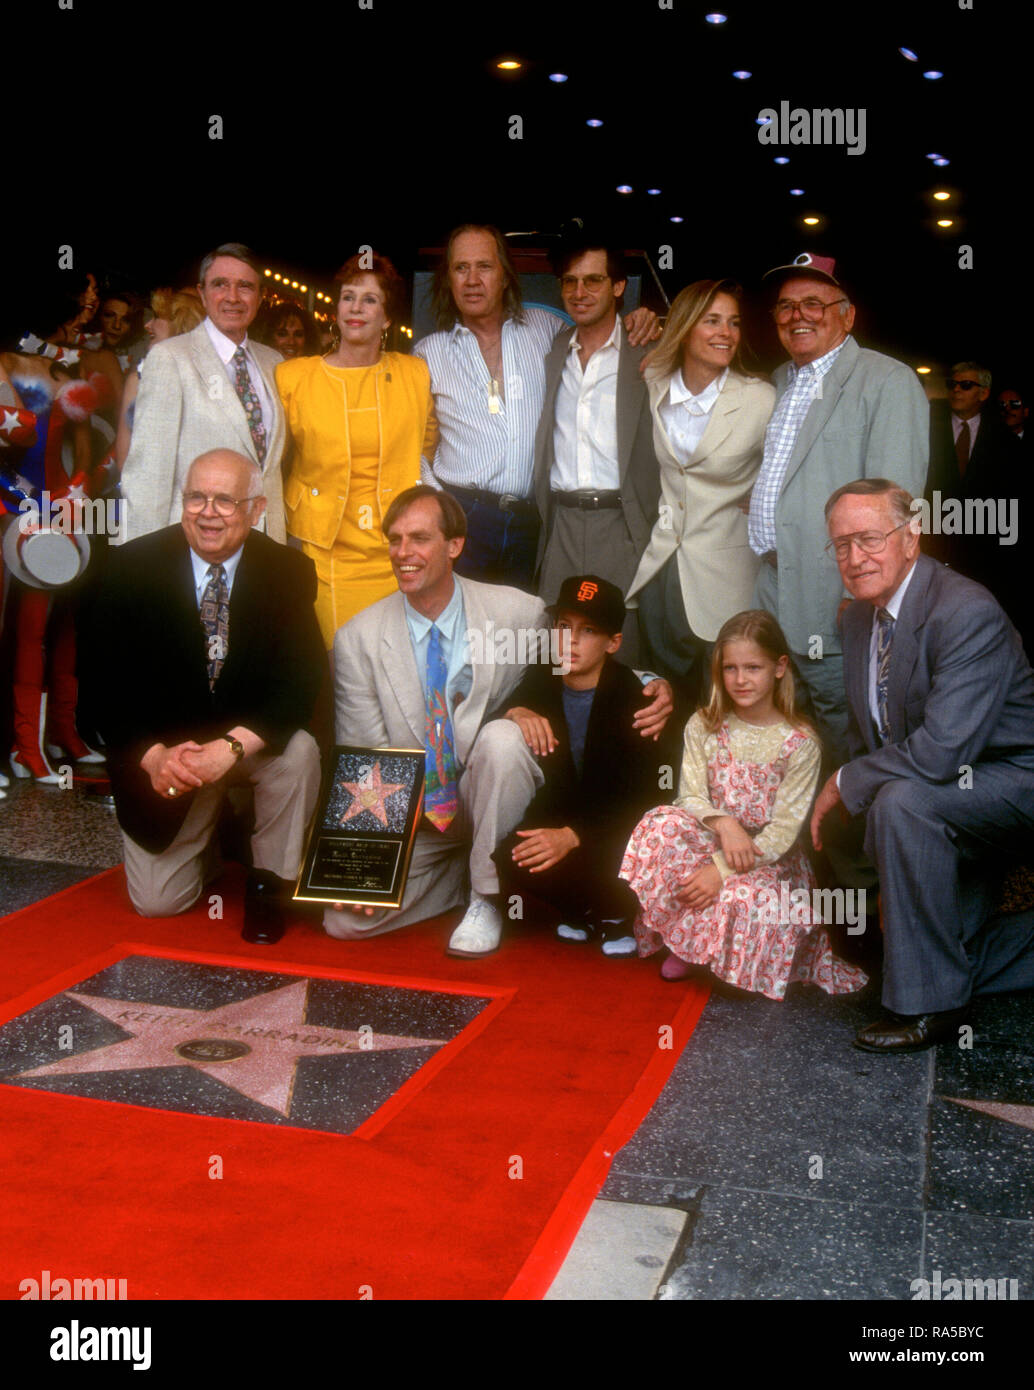 HOLLYWOOD, CA - JULY 15: Actress Carol Burnett, actor David Carradine, actor Robert Carradine, Sandra Will Carradine, actor/honoree Keith Carradine, son Cade Carradine and guests attend ceremony for his Star Ceremony on July 15, 1993 on Hollywood Walk of Fame in Hollywood, California. Photo by Barry King/Alamy Stock Photo Stock Photo